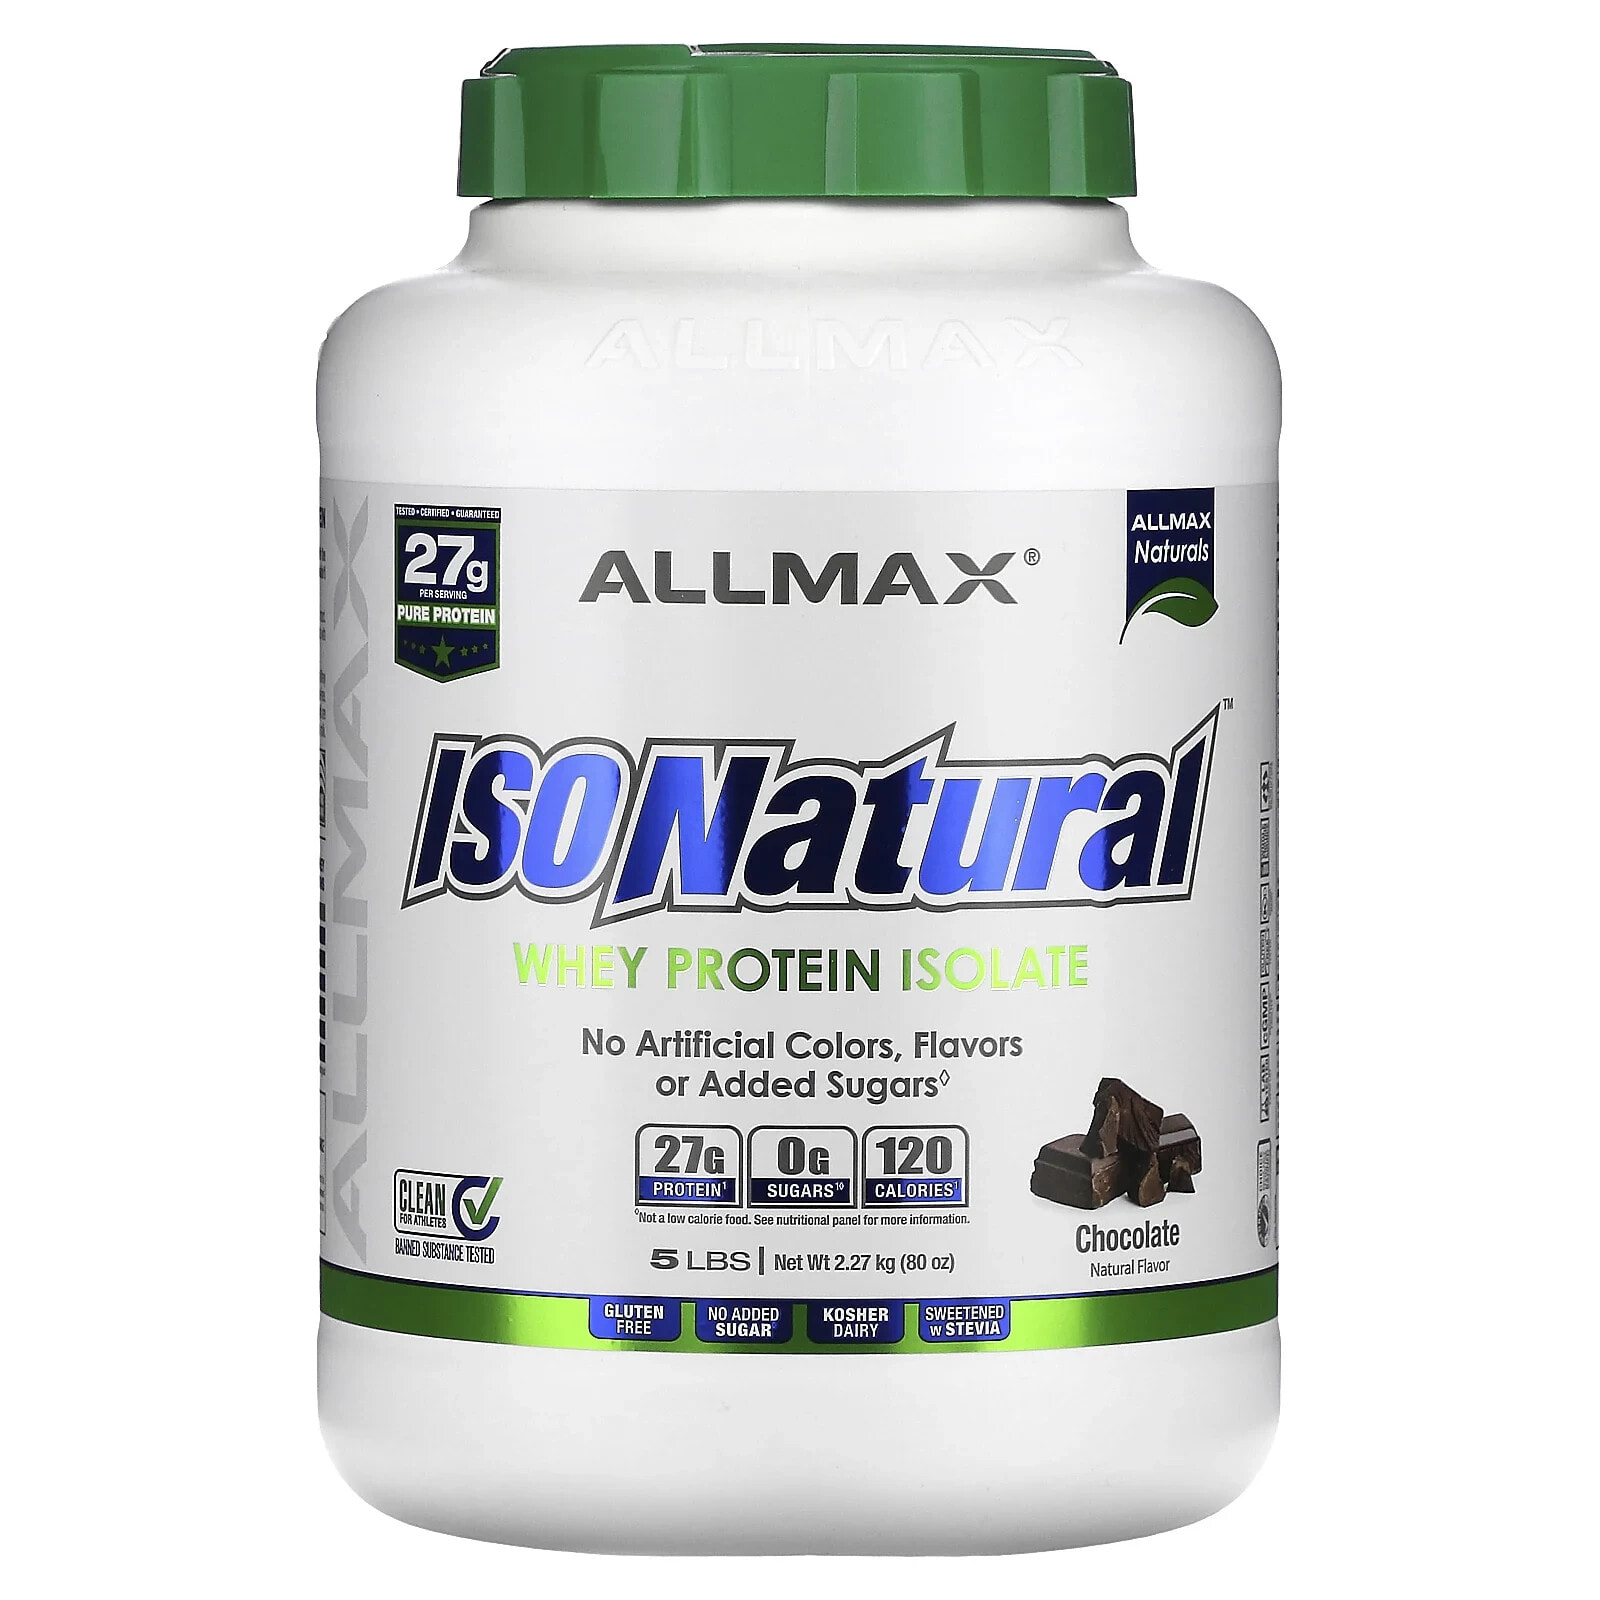 IsoNatural, Whey Protein Isolate, Chocolate, 5 lbs, (2.27 kg)